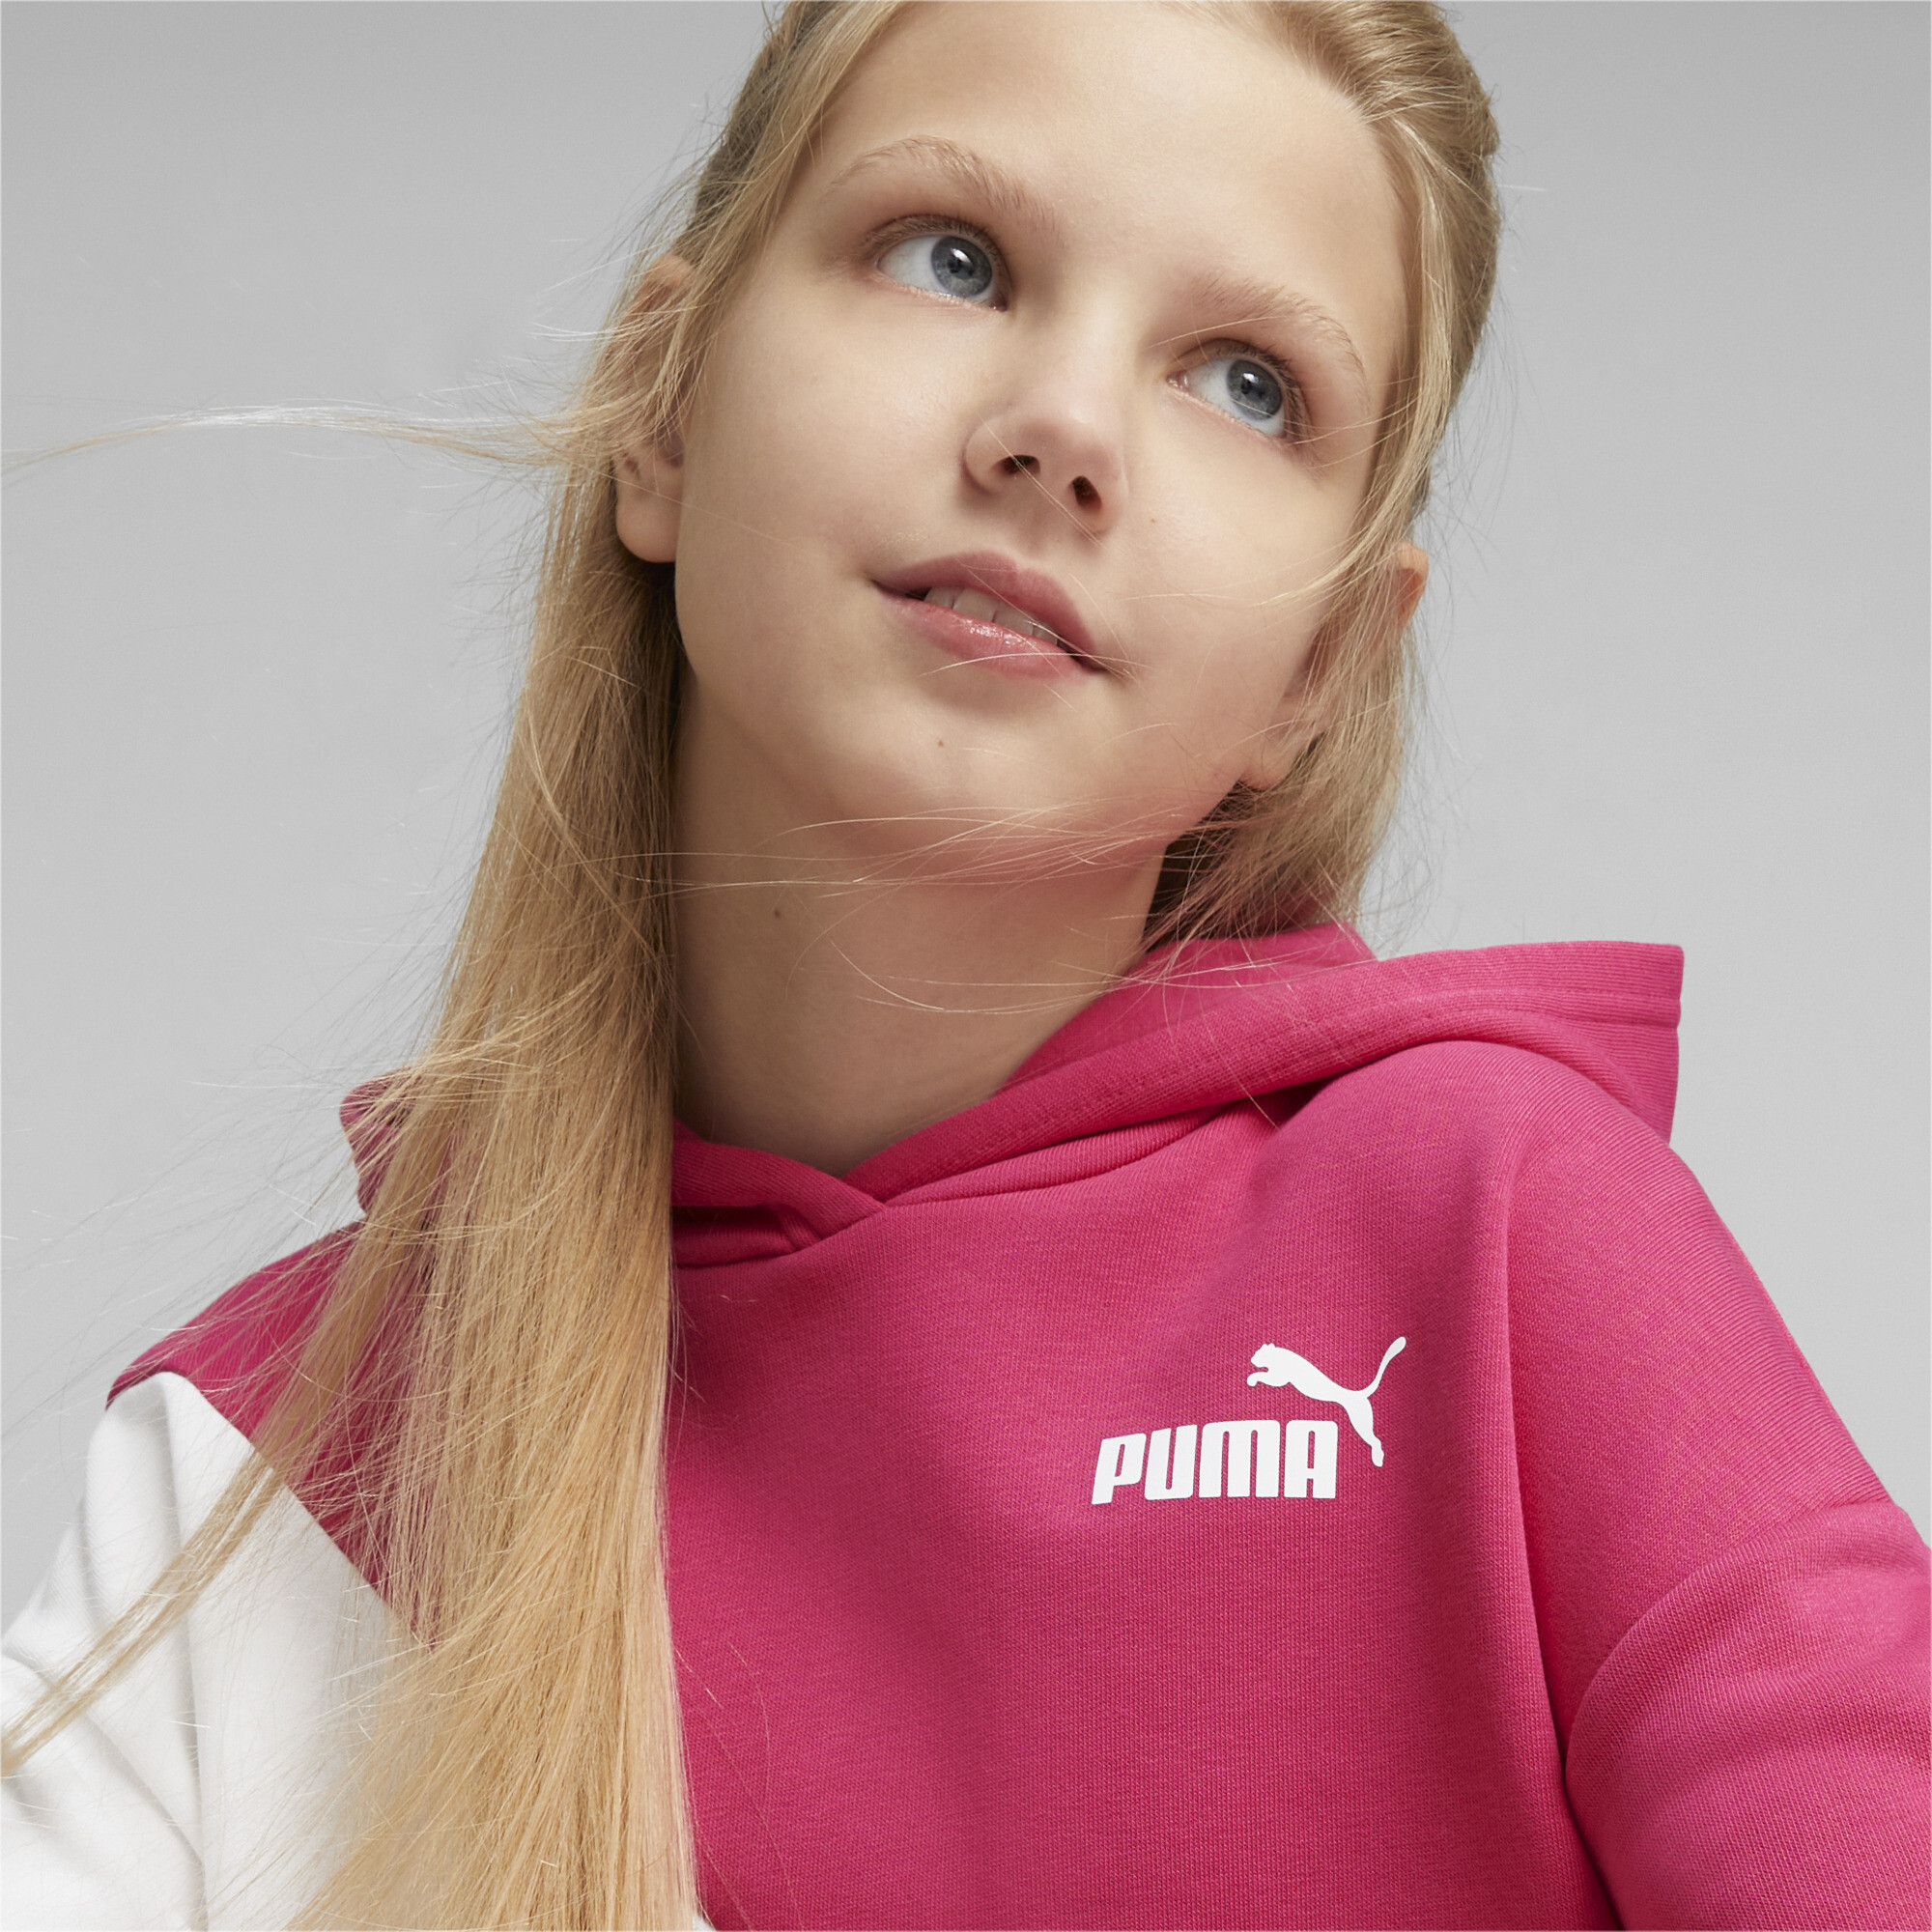 PUMA Power Cat Hoodie In Pink, Size 15-16 Youth